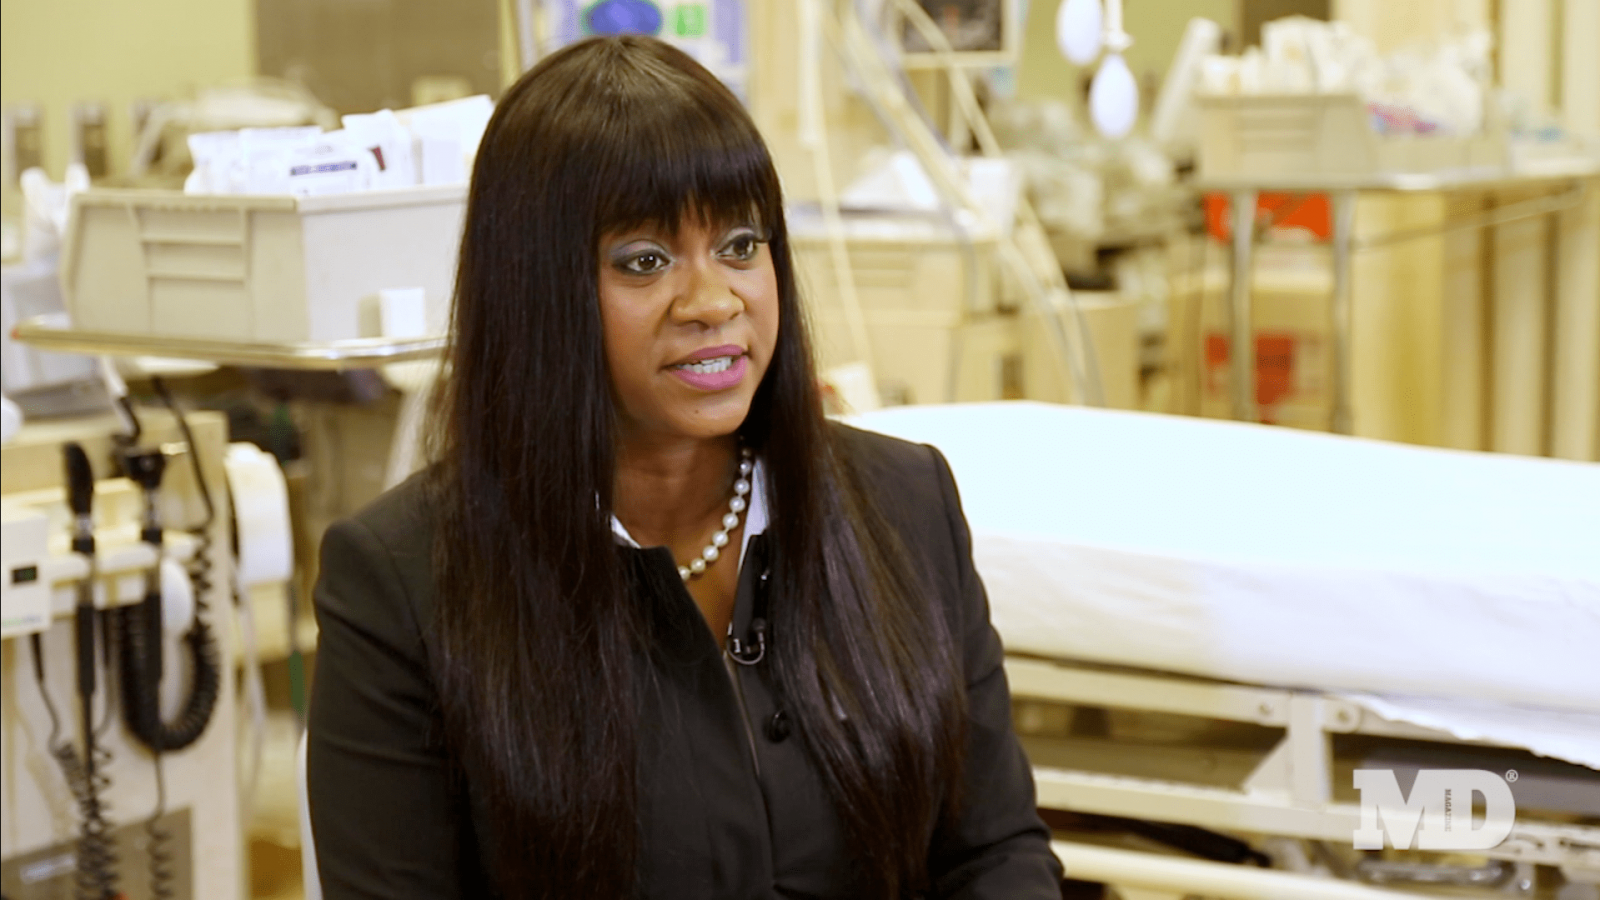 Sharonda Brown, BSN, RN: Stressing Communication in the Emergency Department